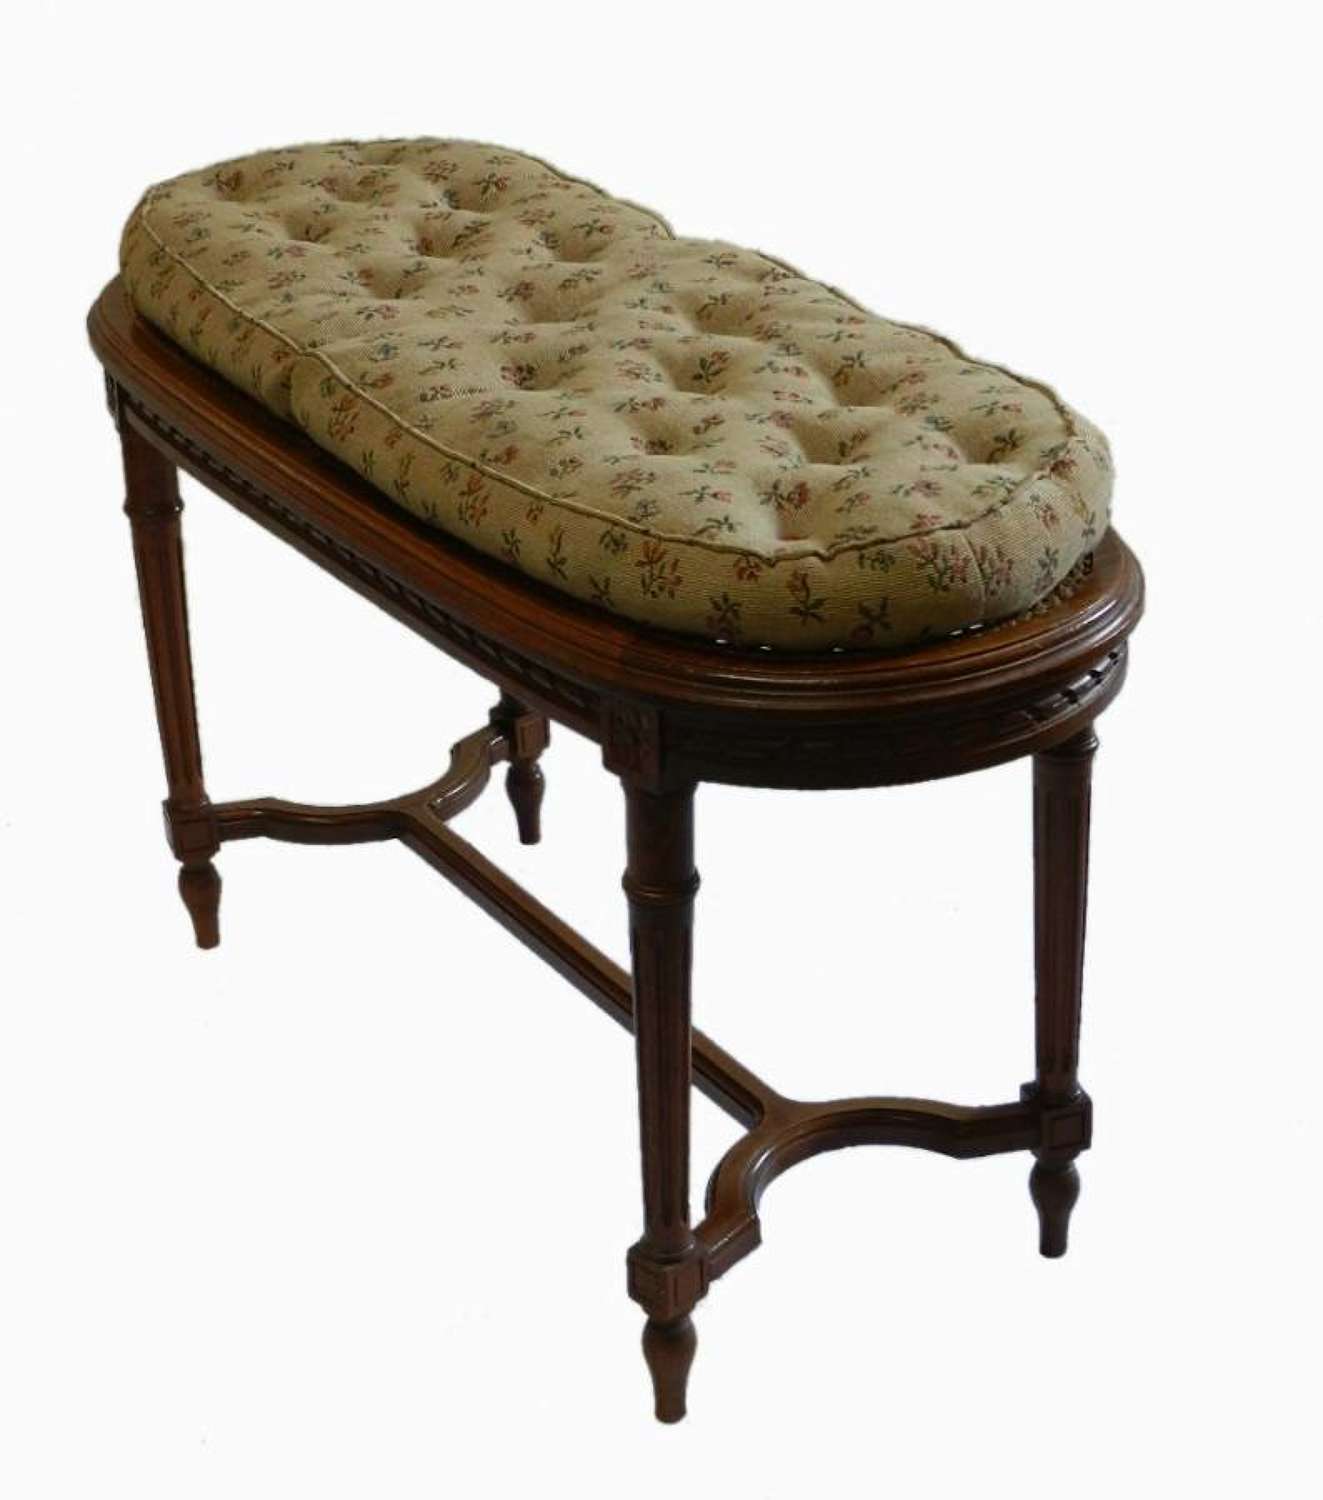 French Stool Window Seat Louis revival